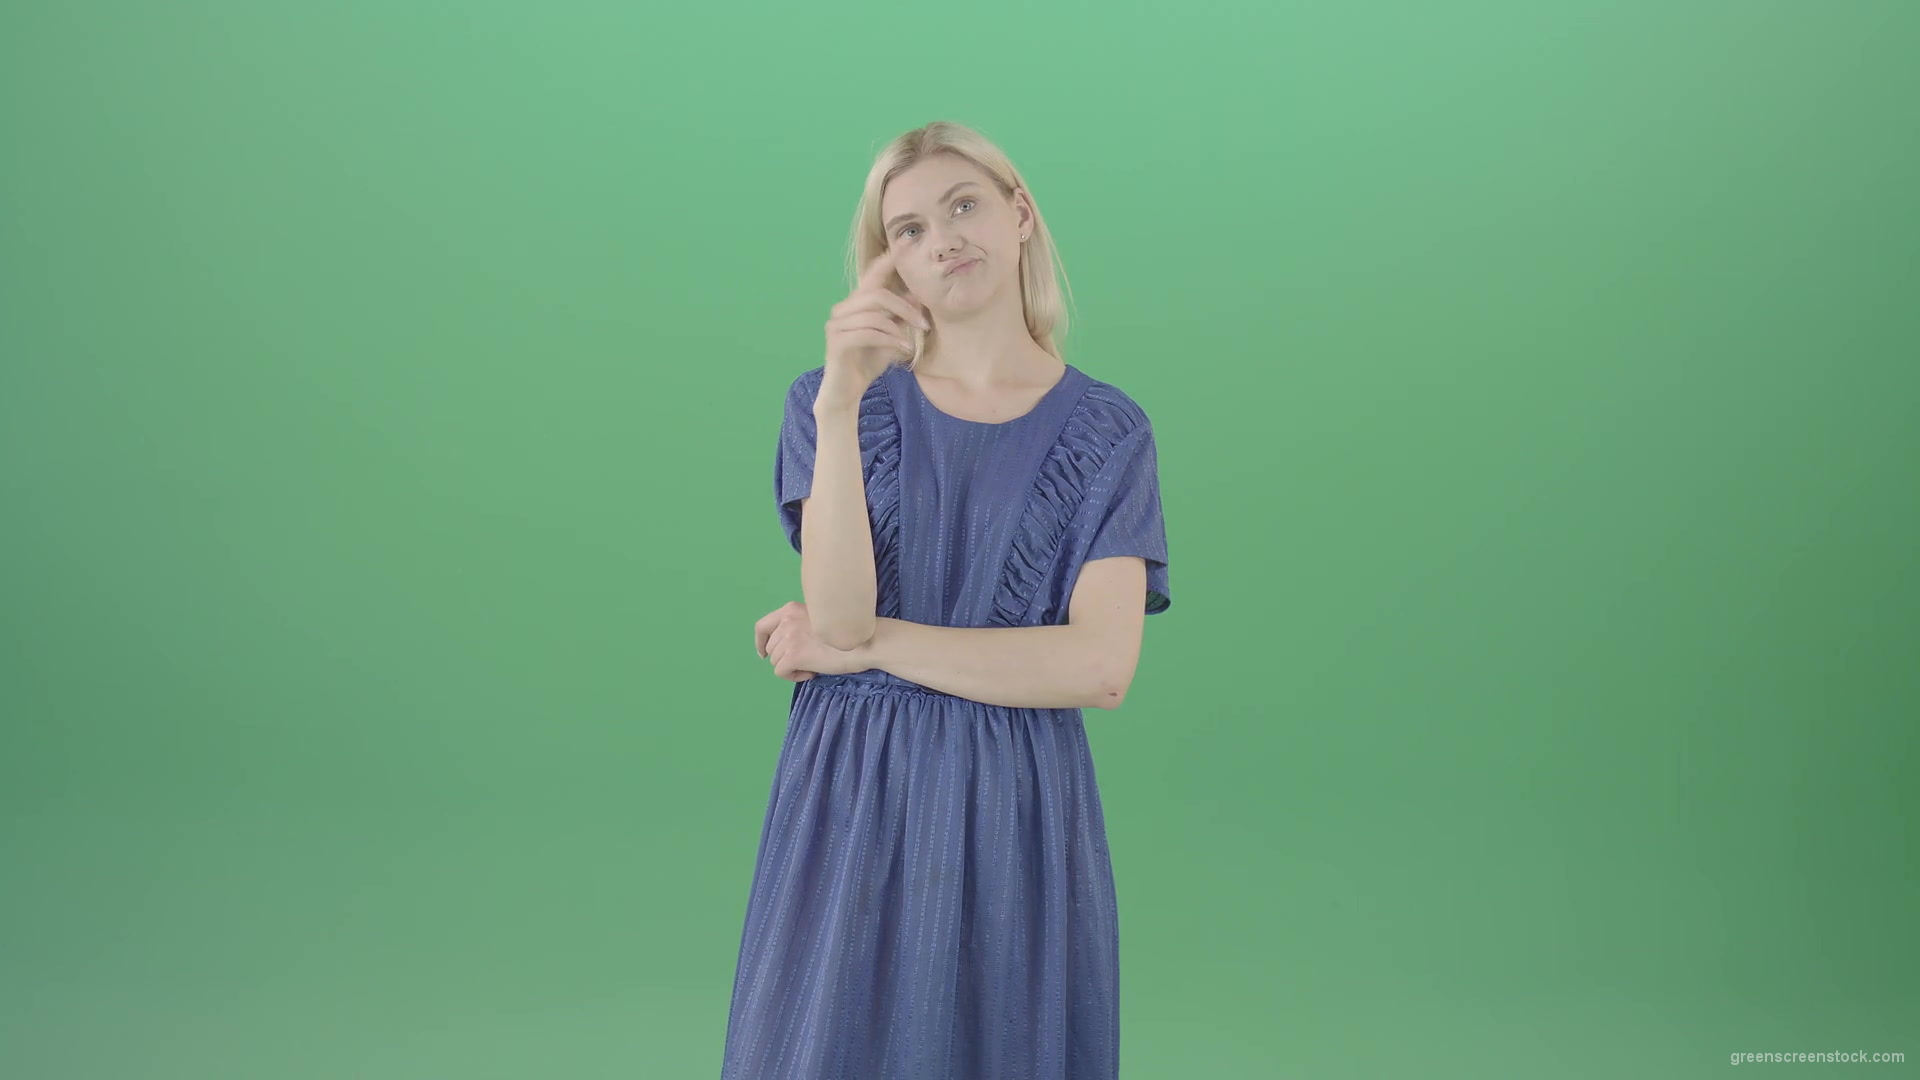 Boring-housewife-in-blue-dress-slide-virtual-products-on-touch-screen-shop-4K-Green-Screen-Video-Footage--1920_005 Green Screen Stock